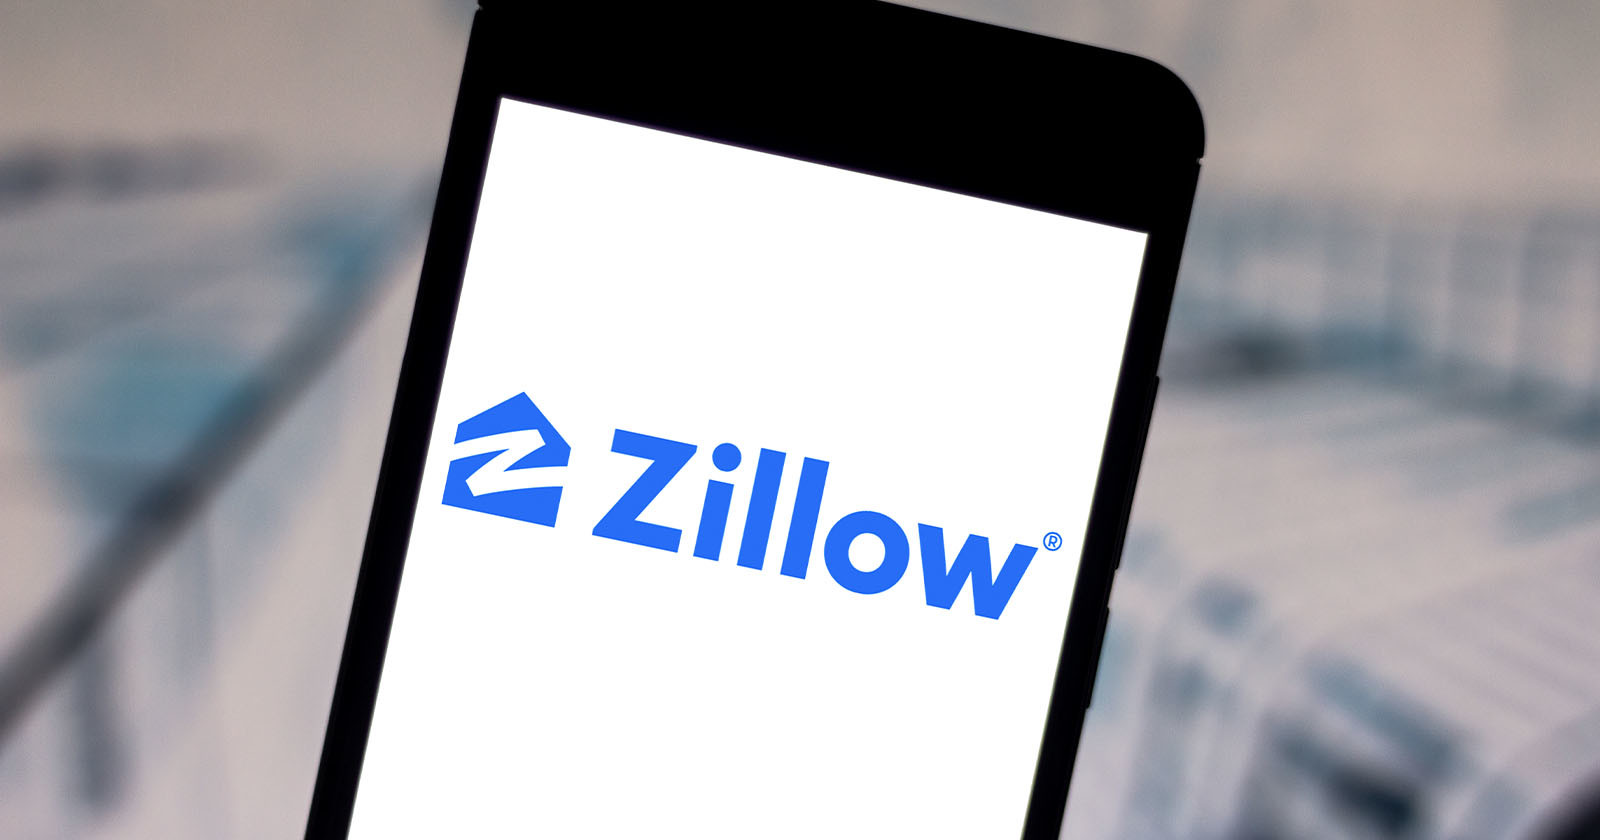 Zillow Only Wants to Be Fined Once for 2,700 Photo Copyright Infringements